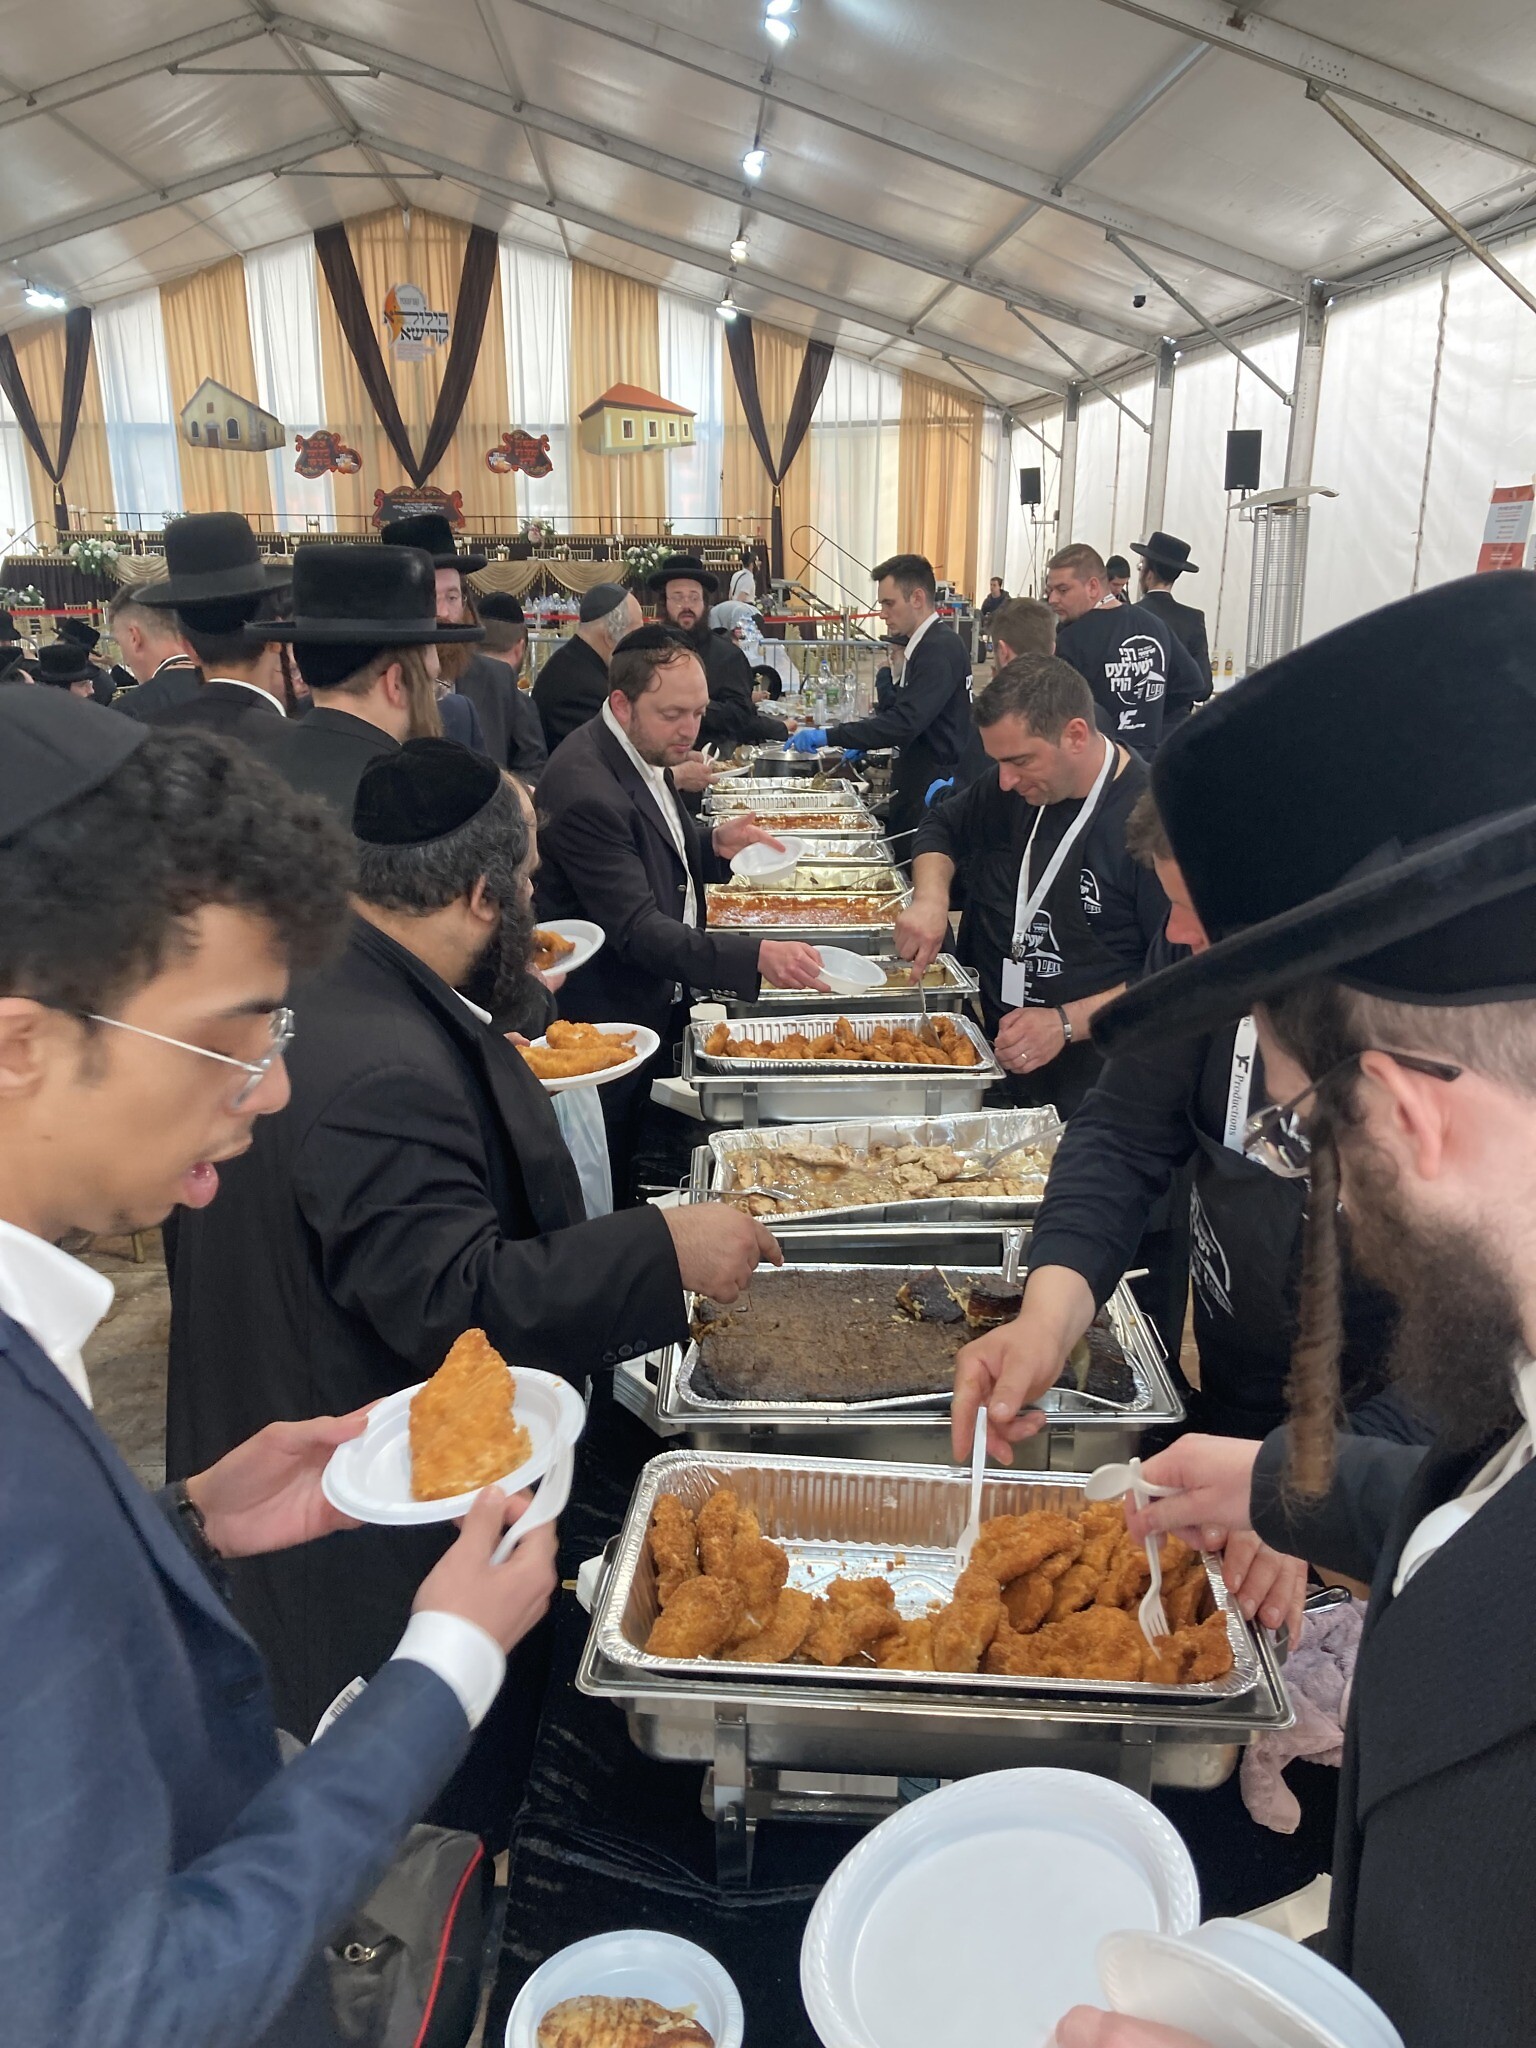 Free food is served at the annual pilgrimage to the gravesite of 'Reb Shayale' Steiner in Bodrogkeresztur, Hungary, April 24, 2023. (Yaakov Schwartz/ Times of Israel)